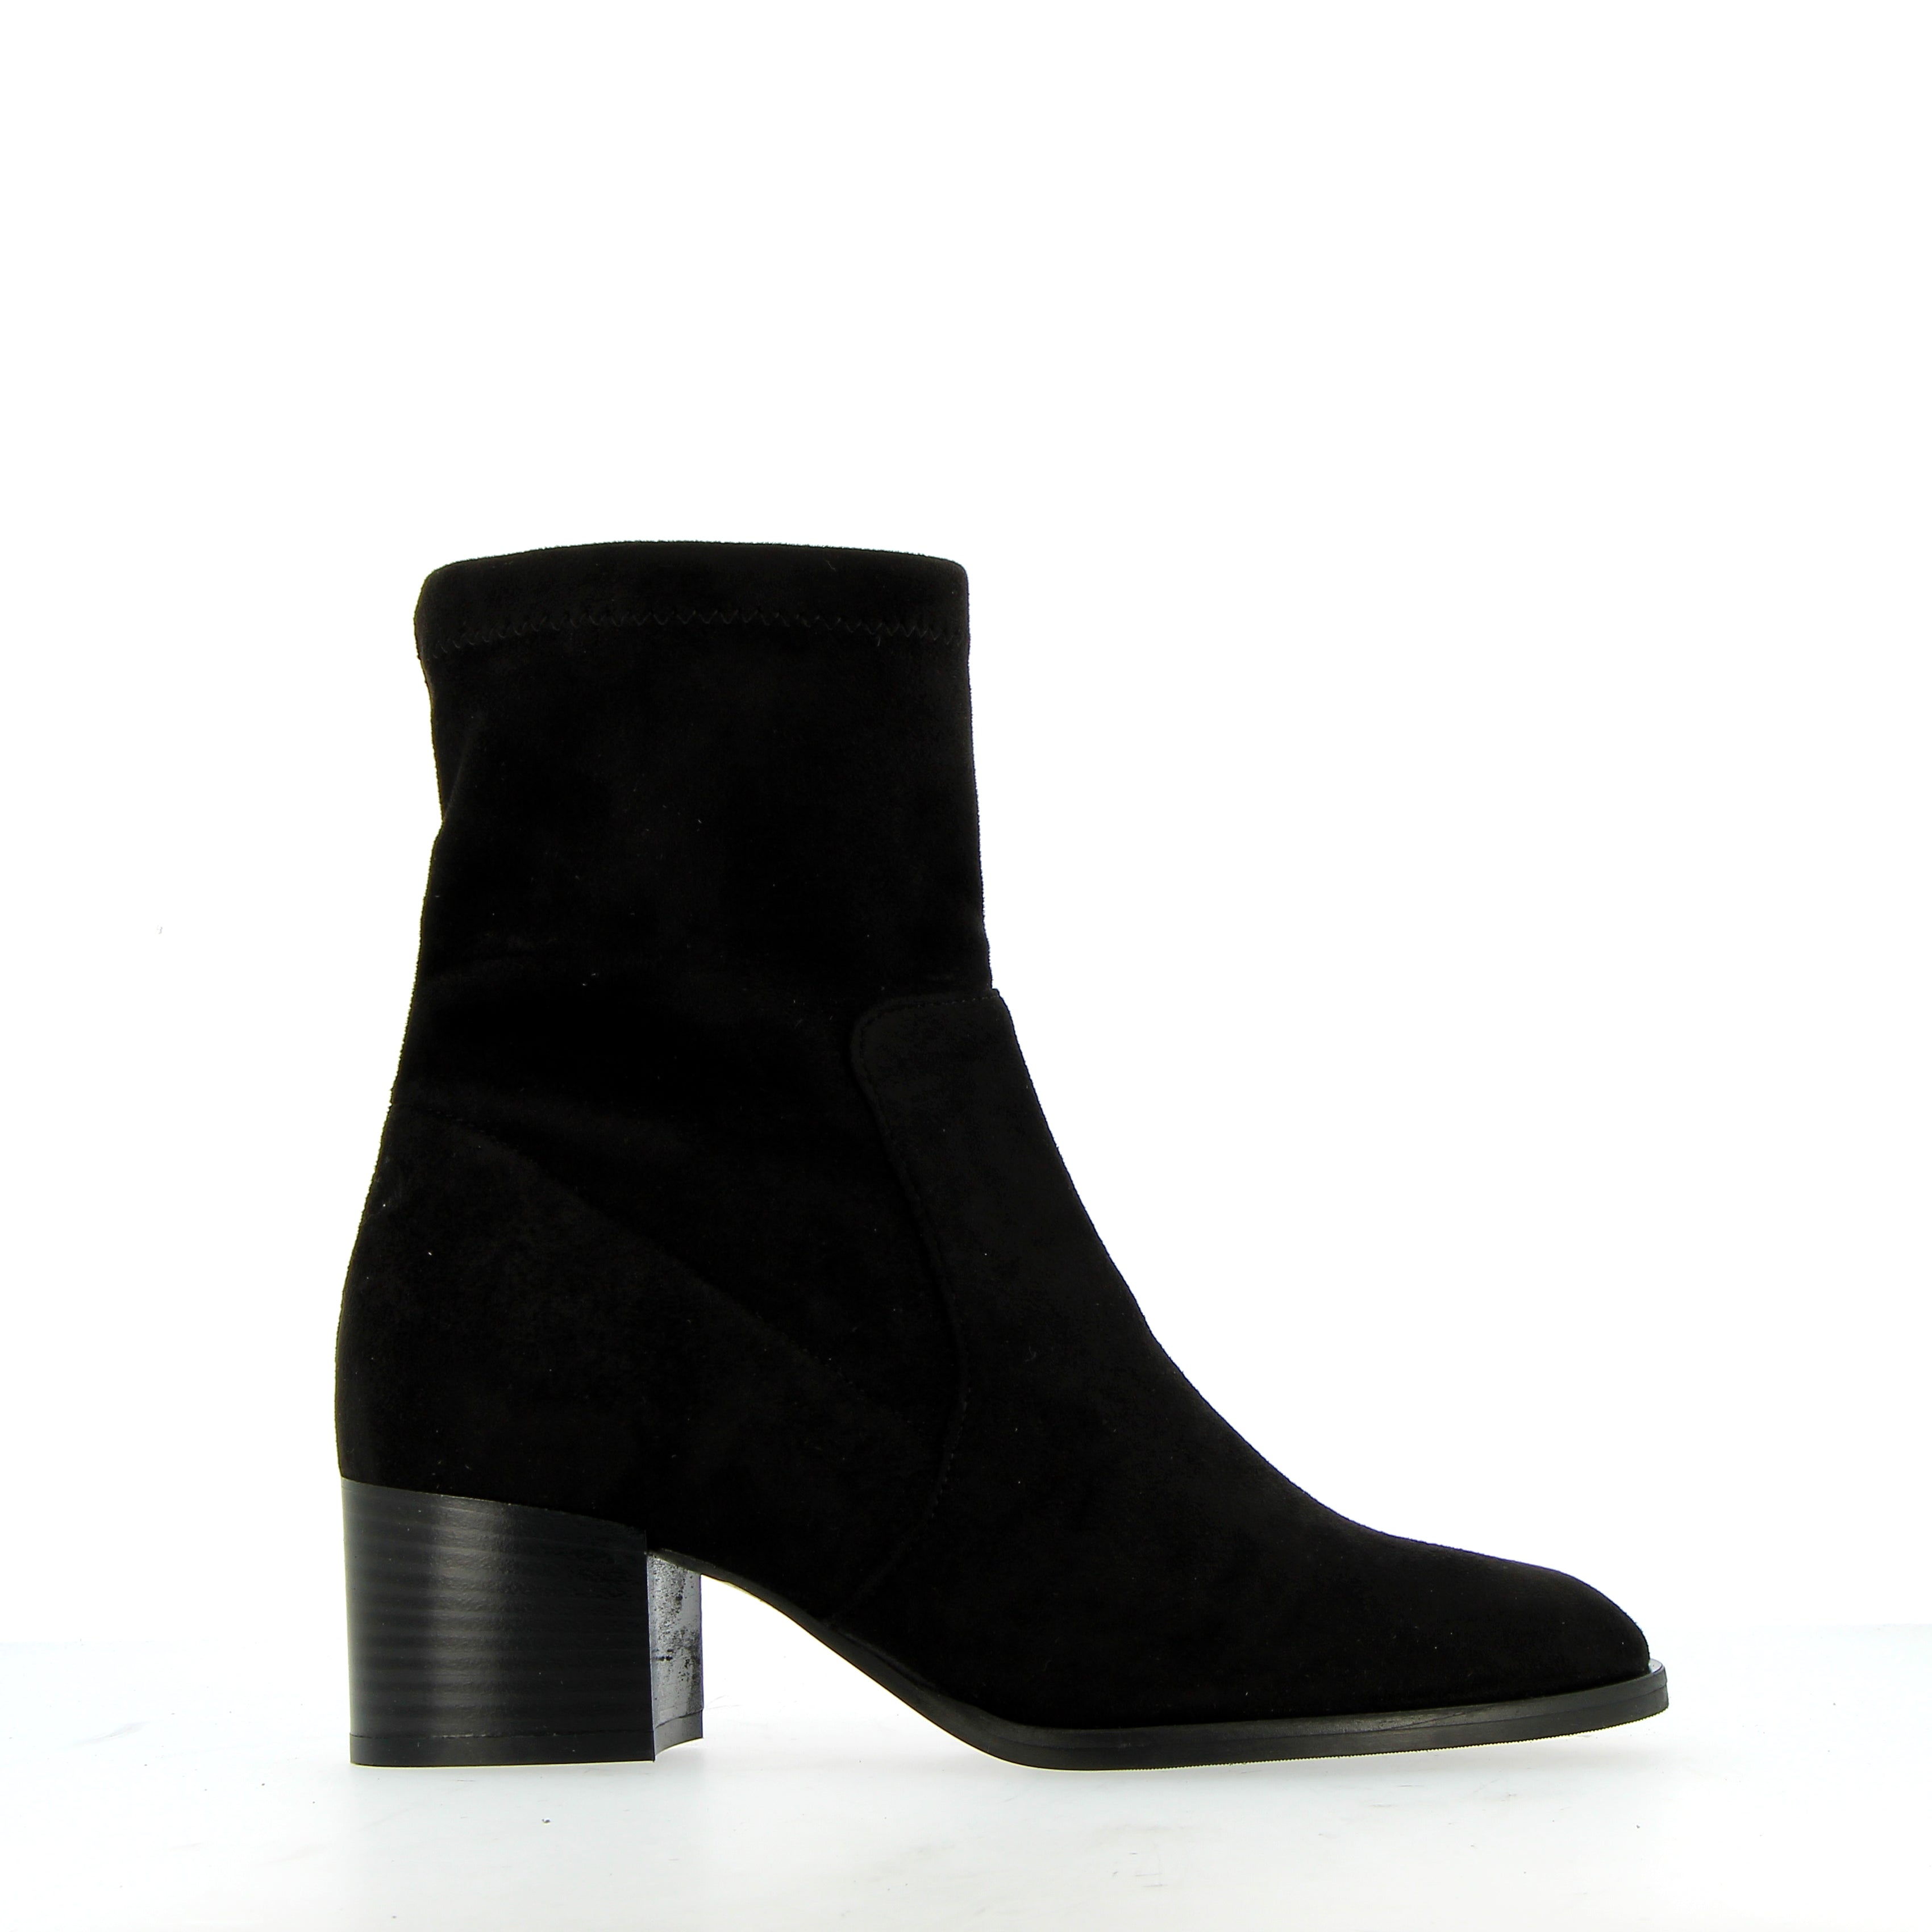 Black stretch vegan suede ankle boot